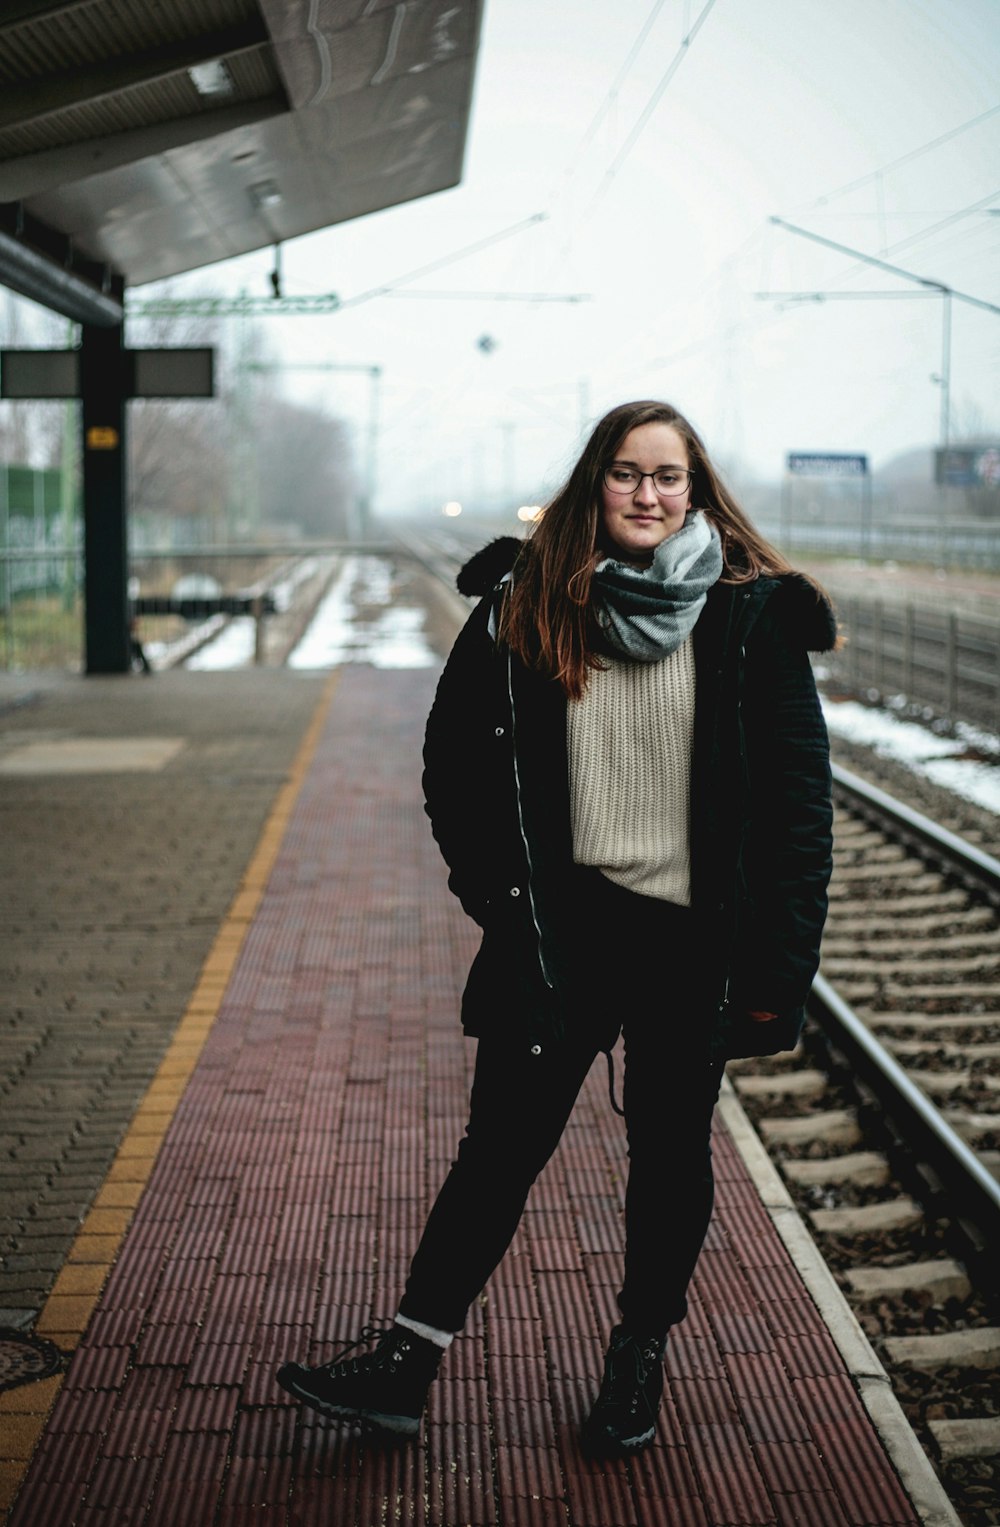 woman in black jacket standing on train rail during daytime